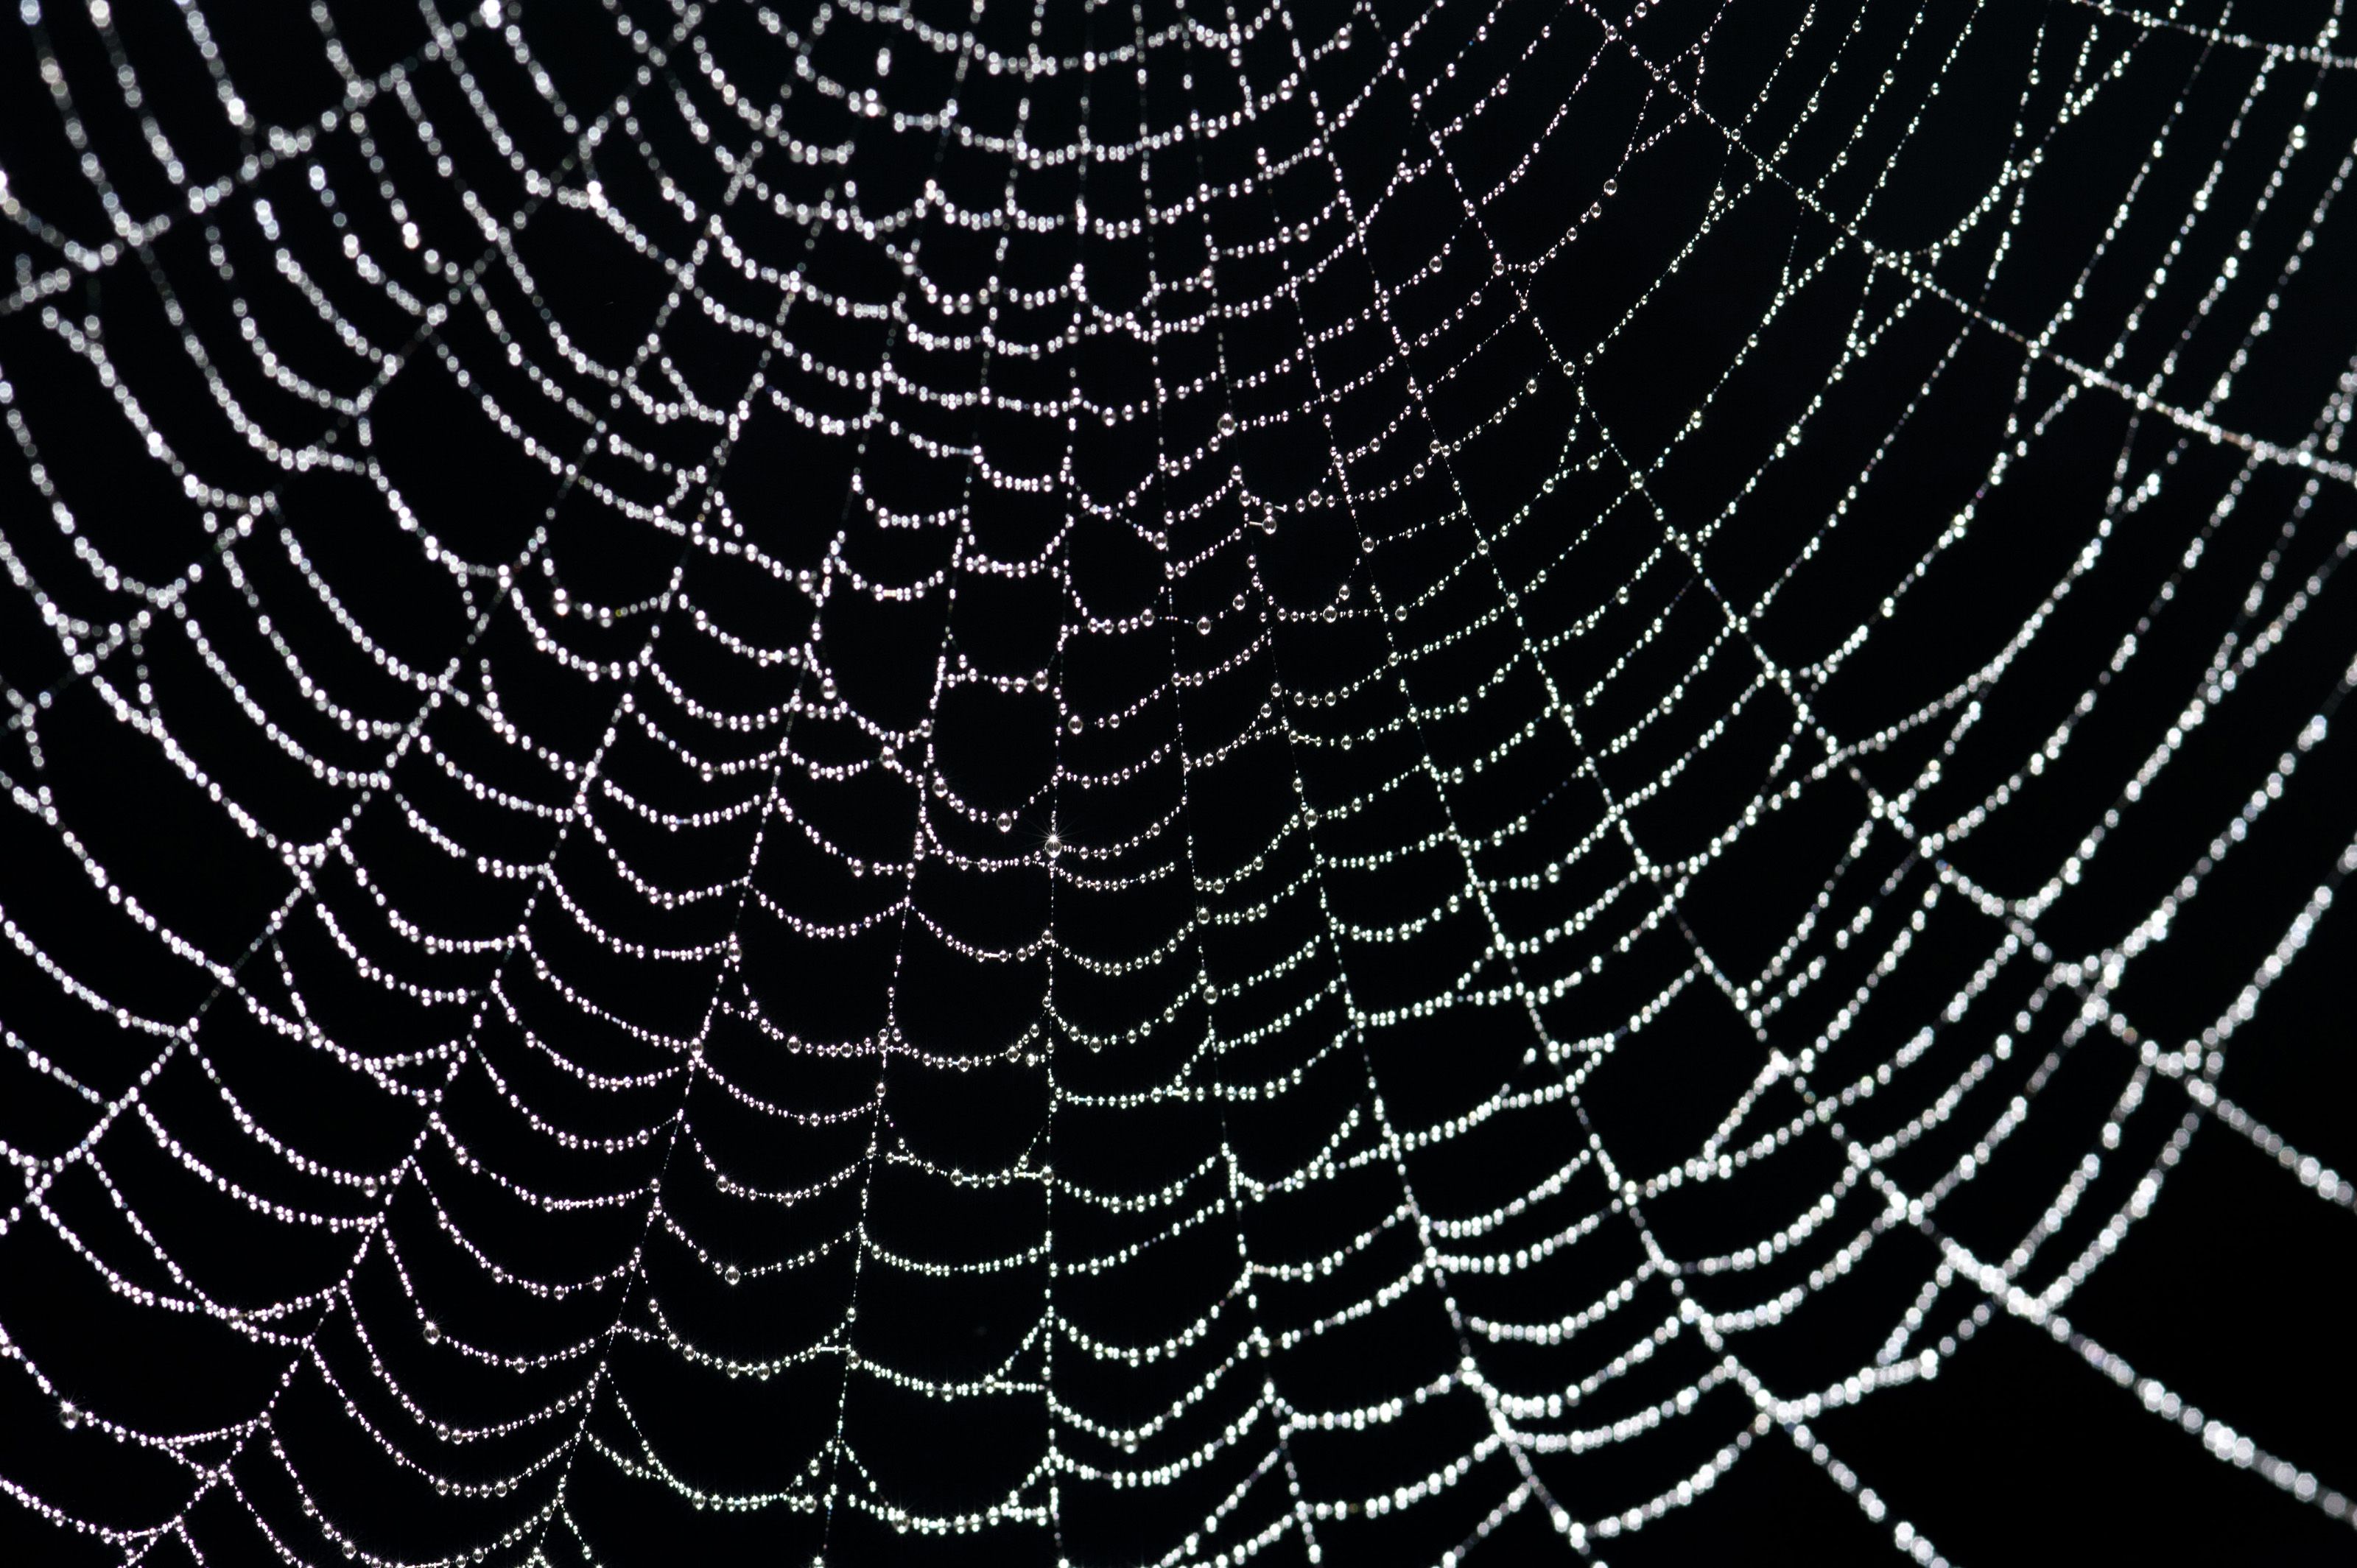 Sparkling water droplets in a spider web 8145 Stockarch Free